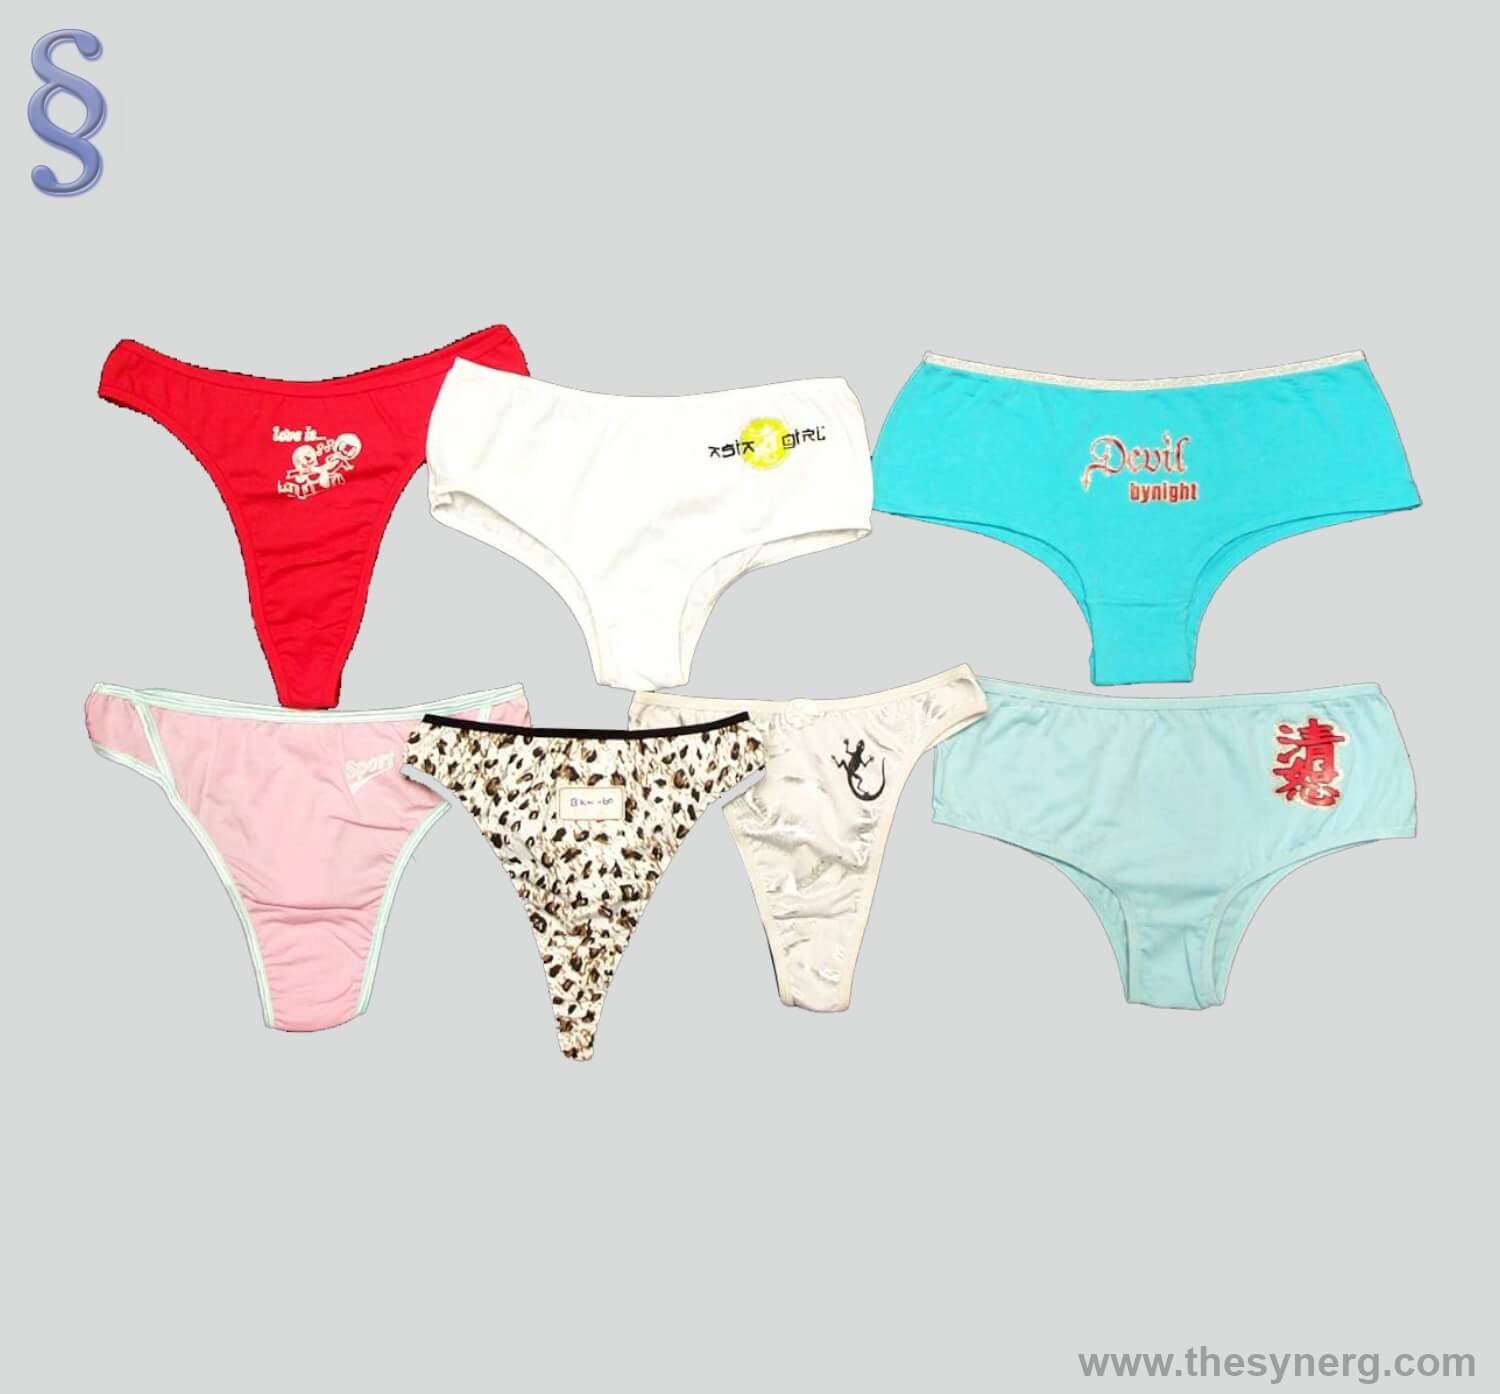 girl underwear model pics, girl underwear model pics Suppliers and  Manufacturers at